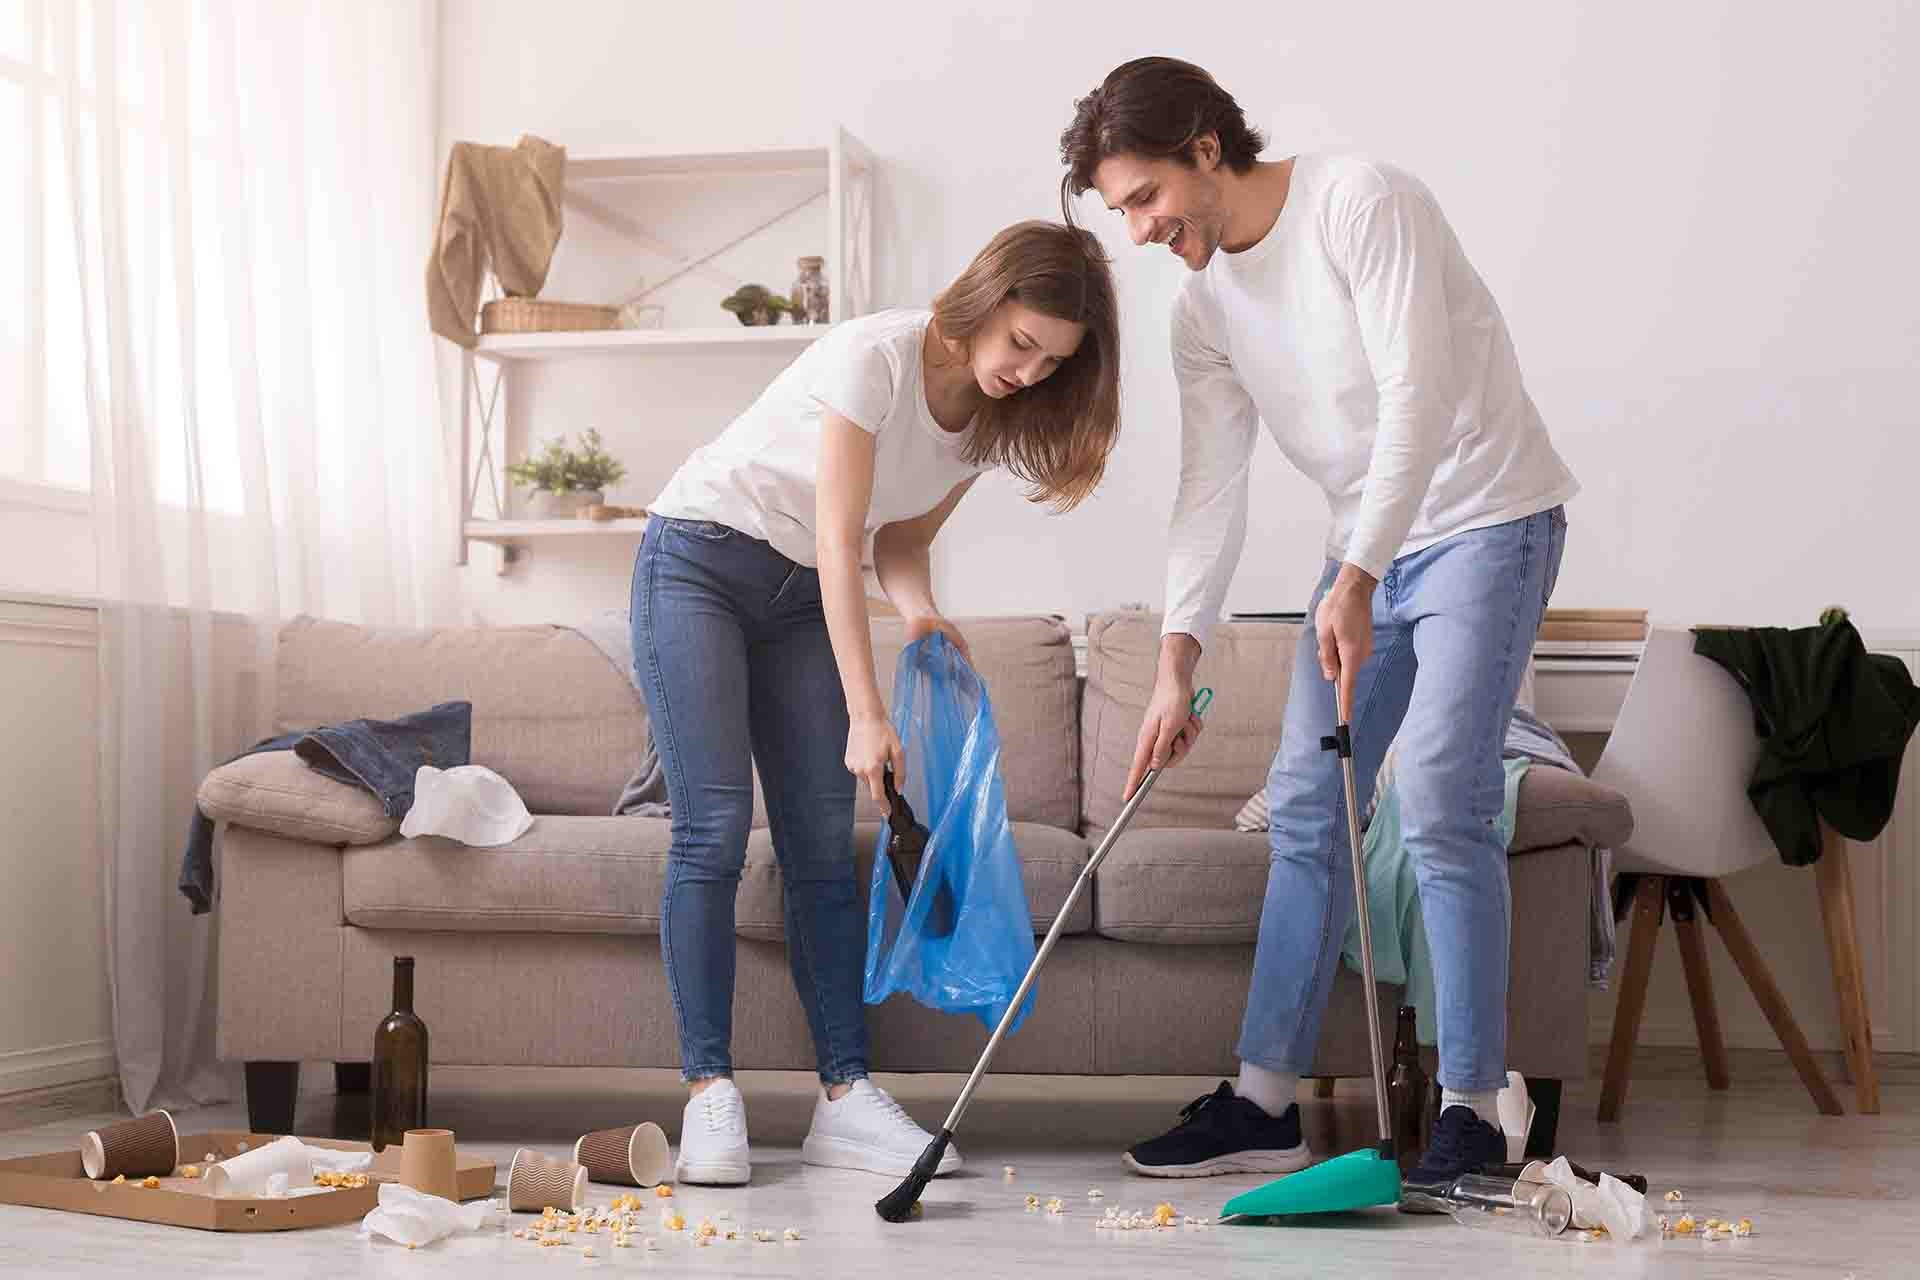 Cleaning Up Once Holiday Guests Have Gone